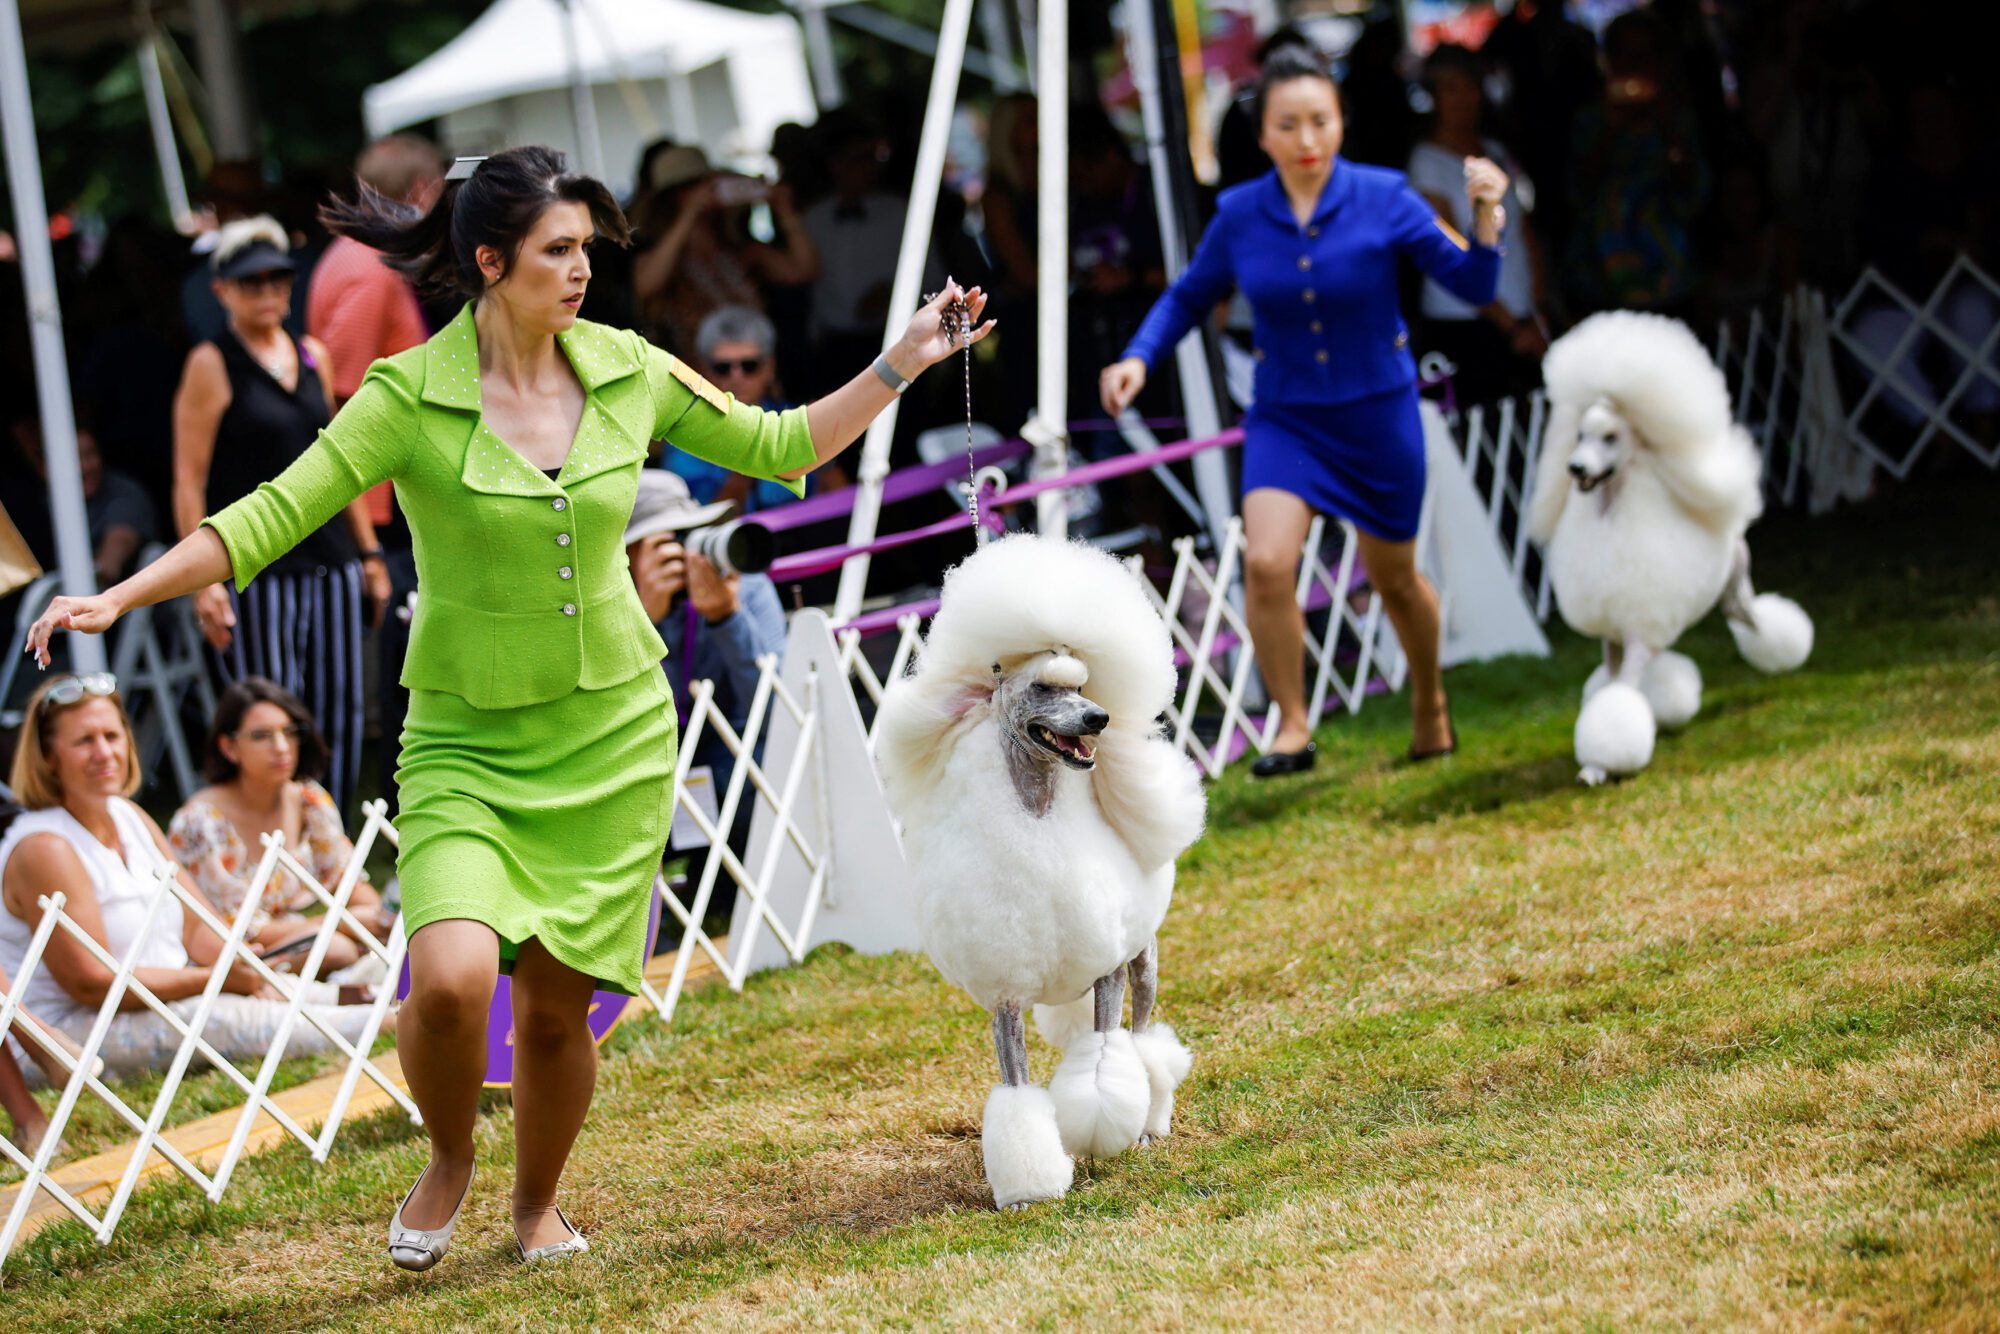 Standard Poodle dogs compete during the 146th Westminster Kennel Club Dog Show at the Lyndhurst Estate in Tarrytown, New York, U.S., June 21, 2022. REUTERS/Eduardo Munoz